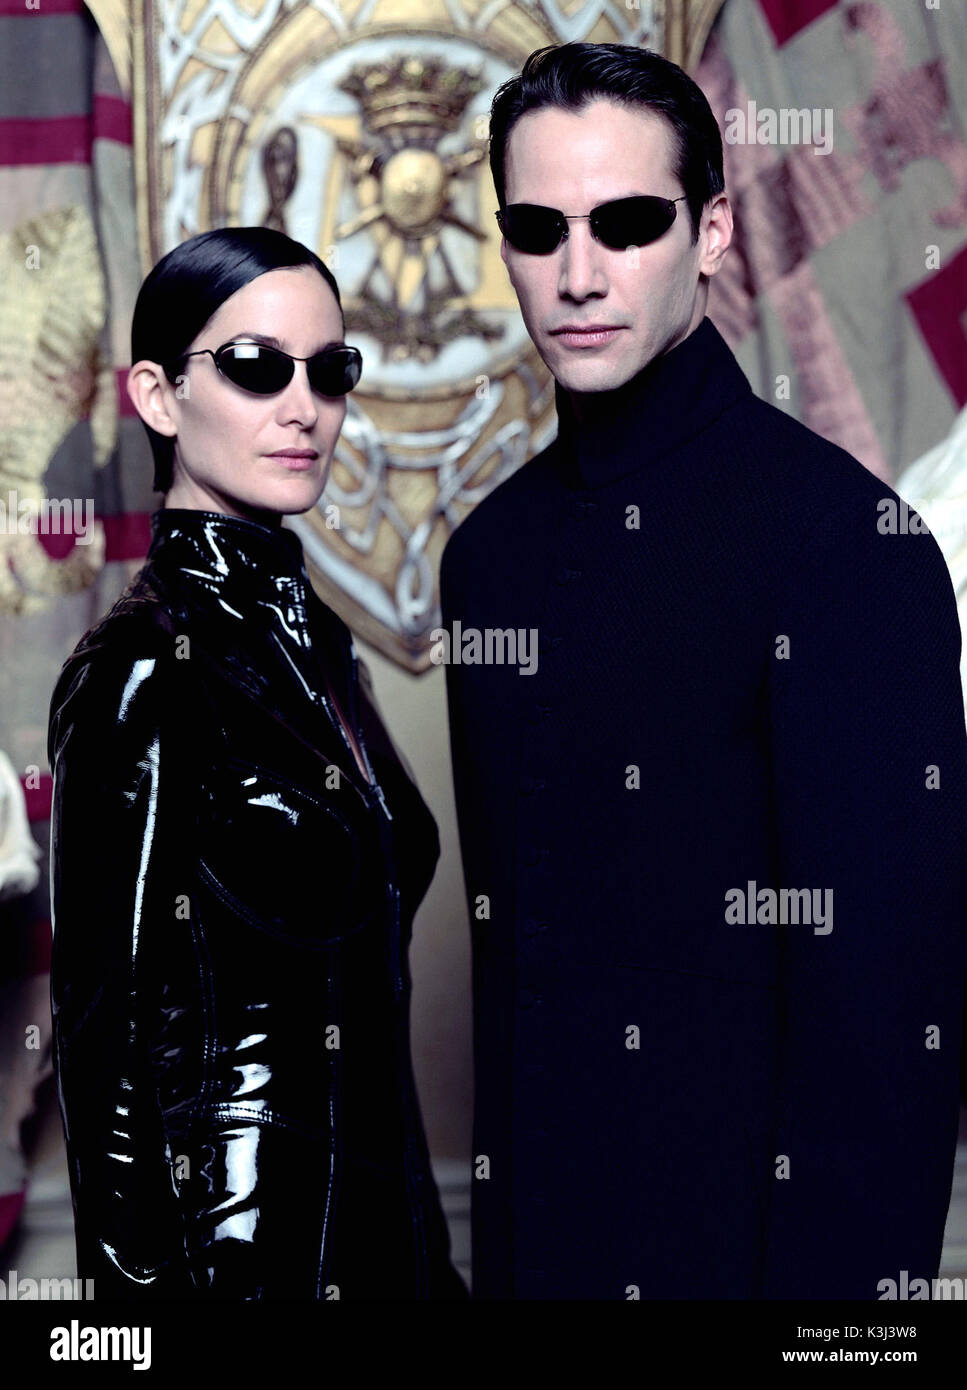 THE MATRIX RELOADED CARRIE-ANNE MOSS as Trinity, KEANU REEVES as Neo Stock Photo